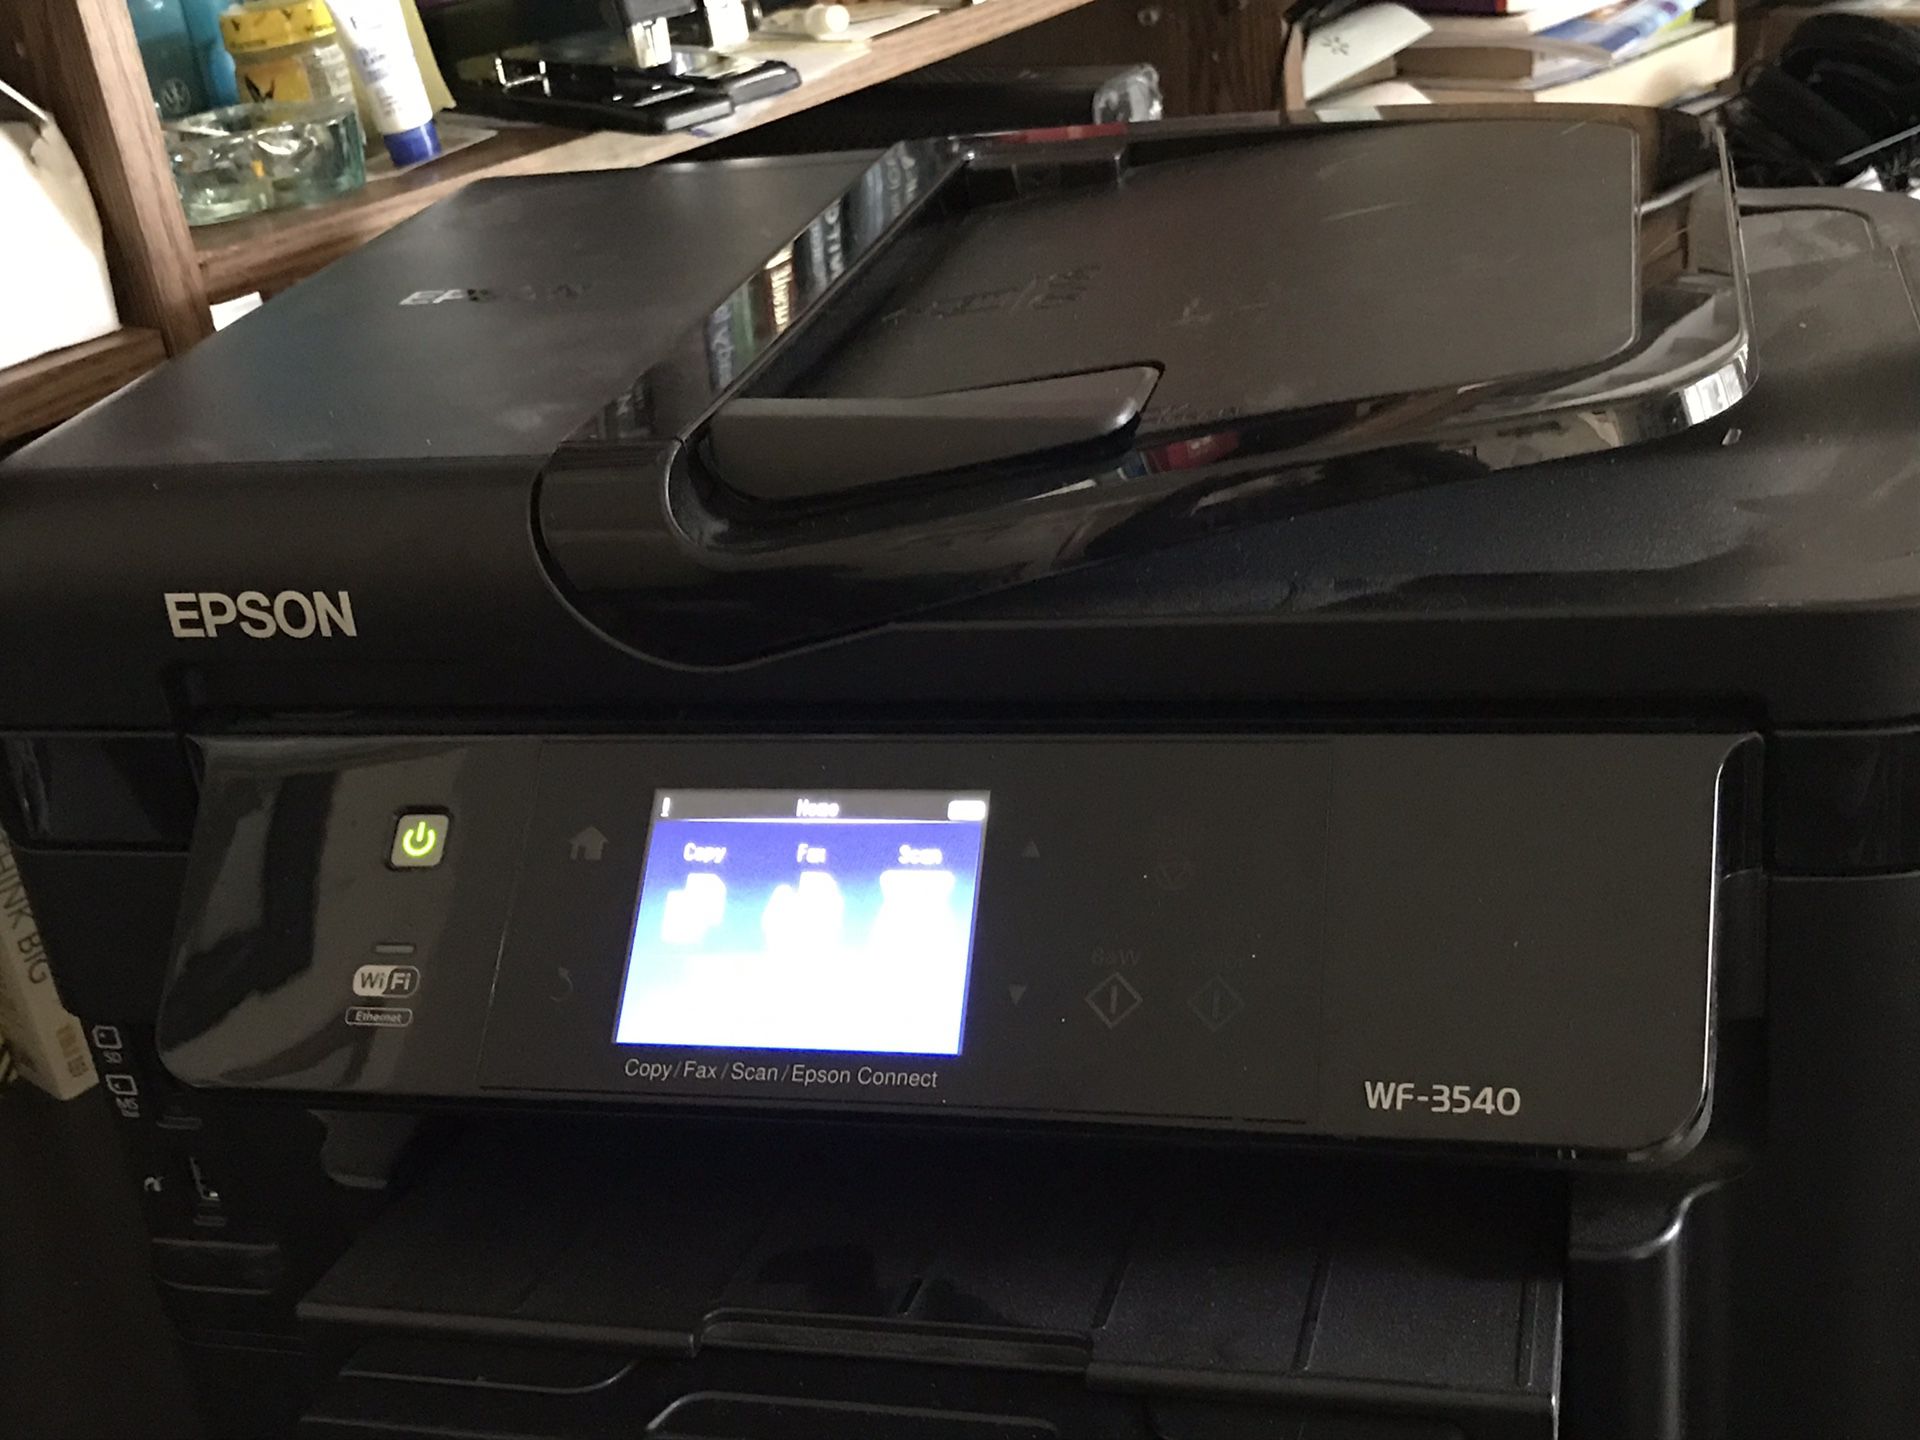 Epson WorkForce WF 3540 Wireless Color Printer with Scanners